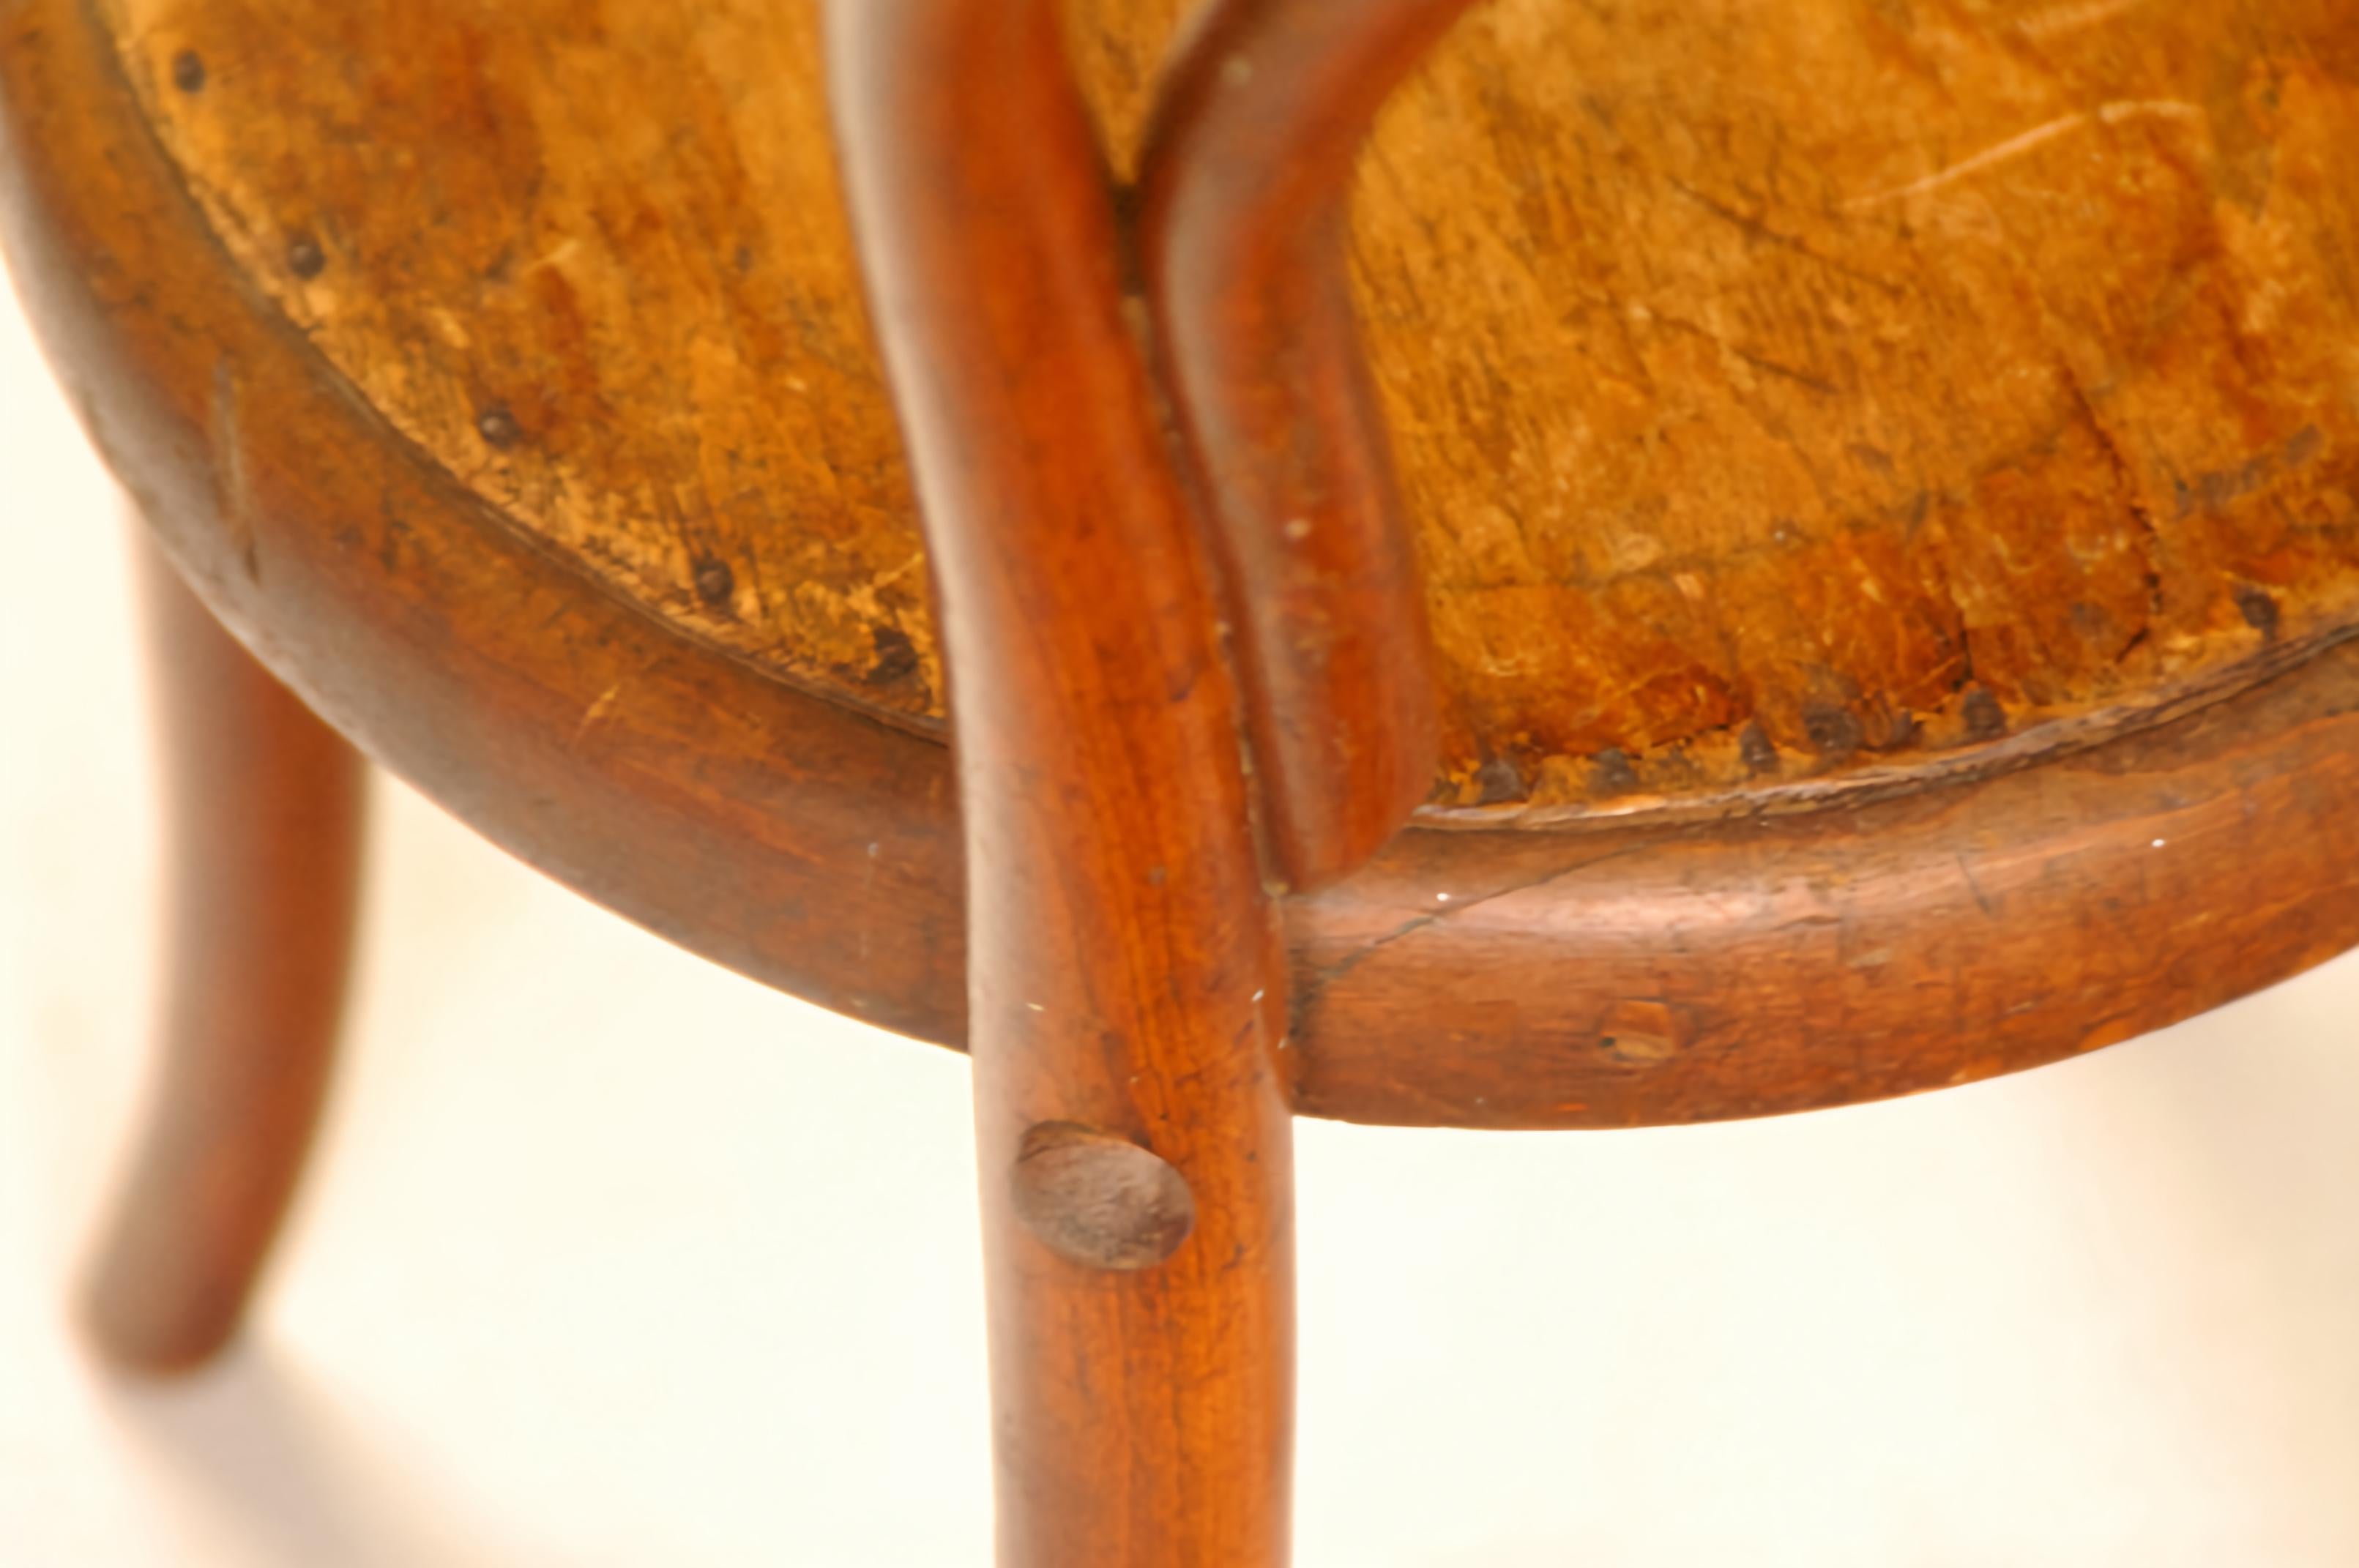 Thonet Child Chair No14 / designed 1859 Vienna / Stamped and labeled / Bentwood 3